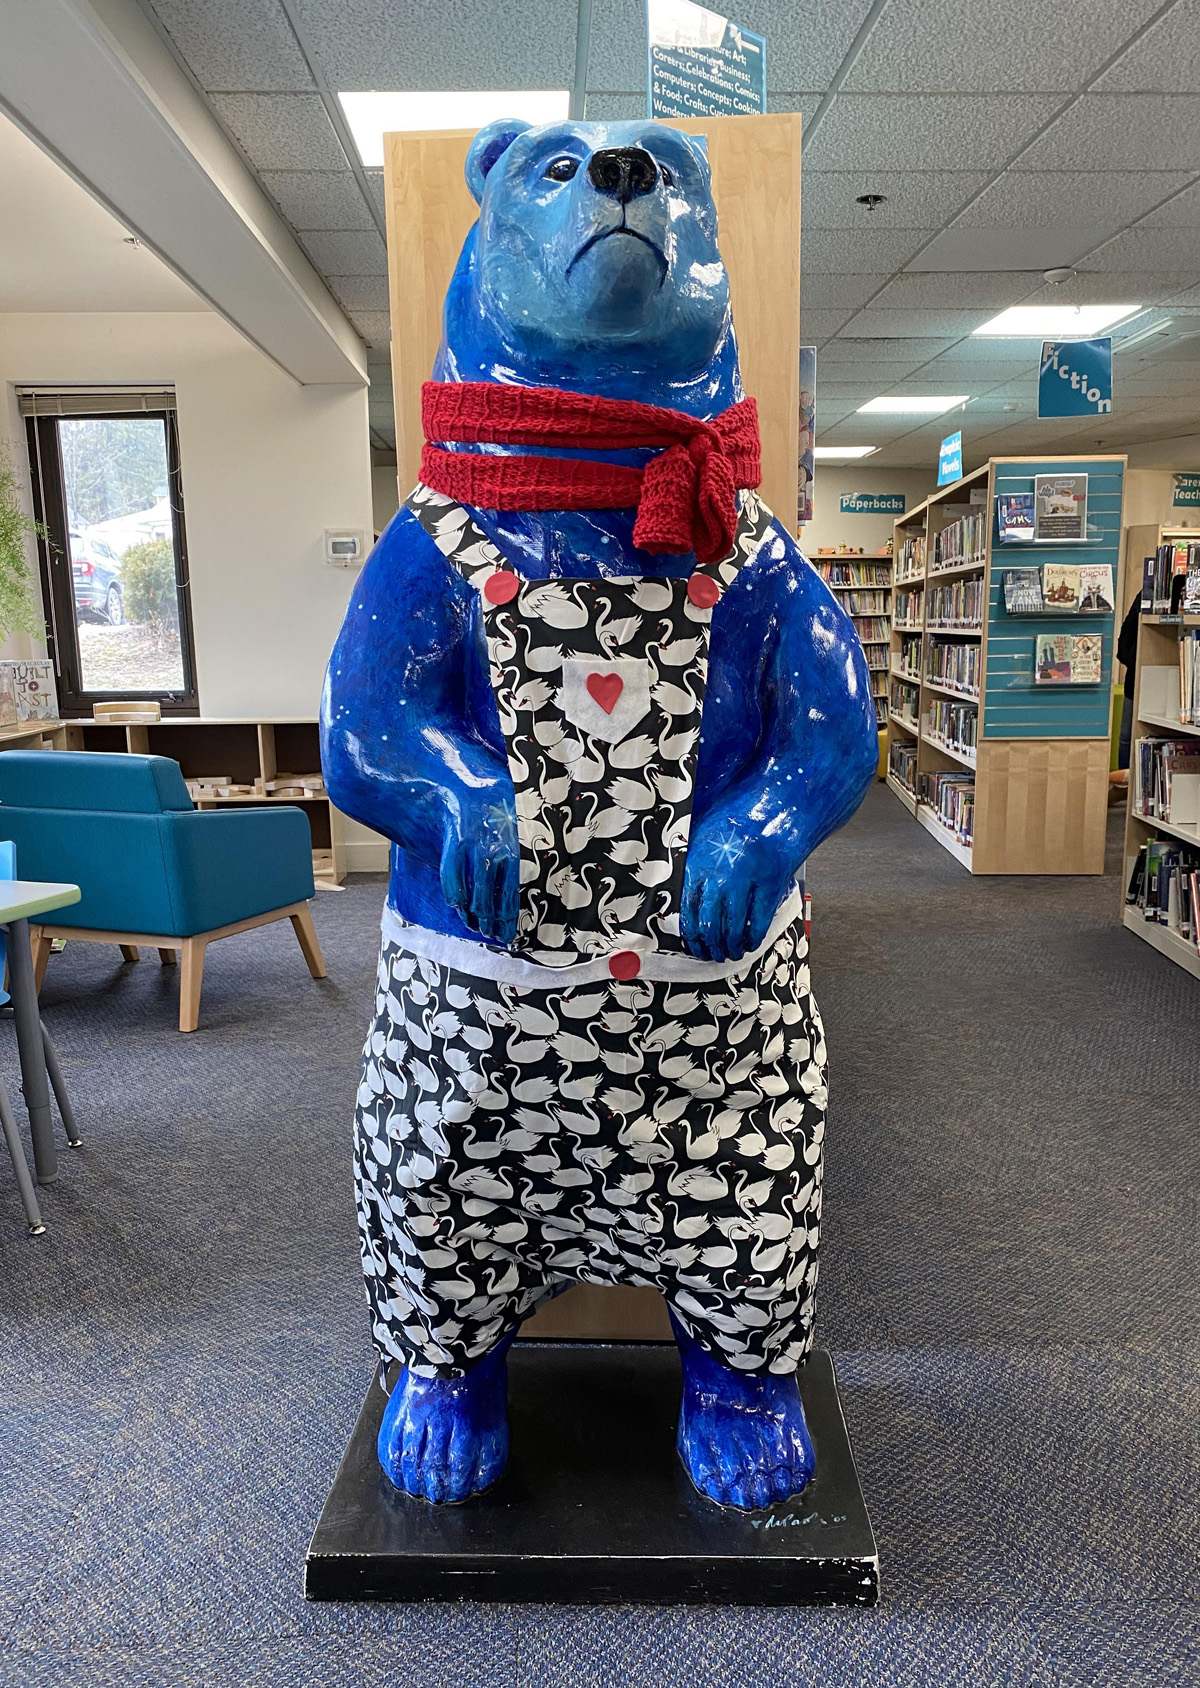 Blue bear sculpture decorated with Valentine's outfit